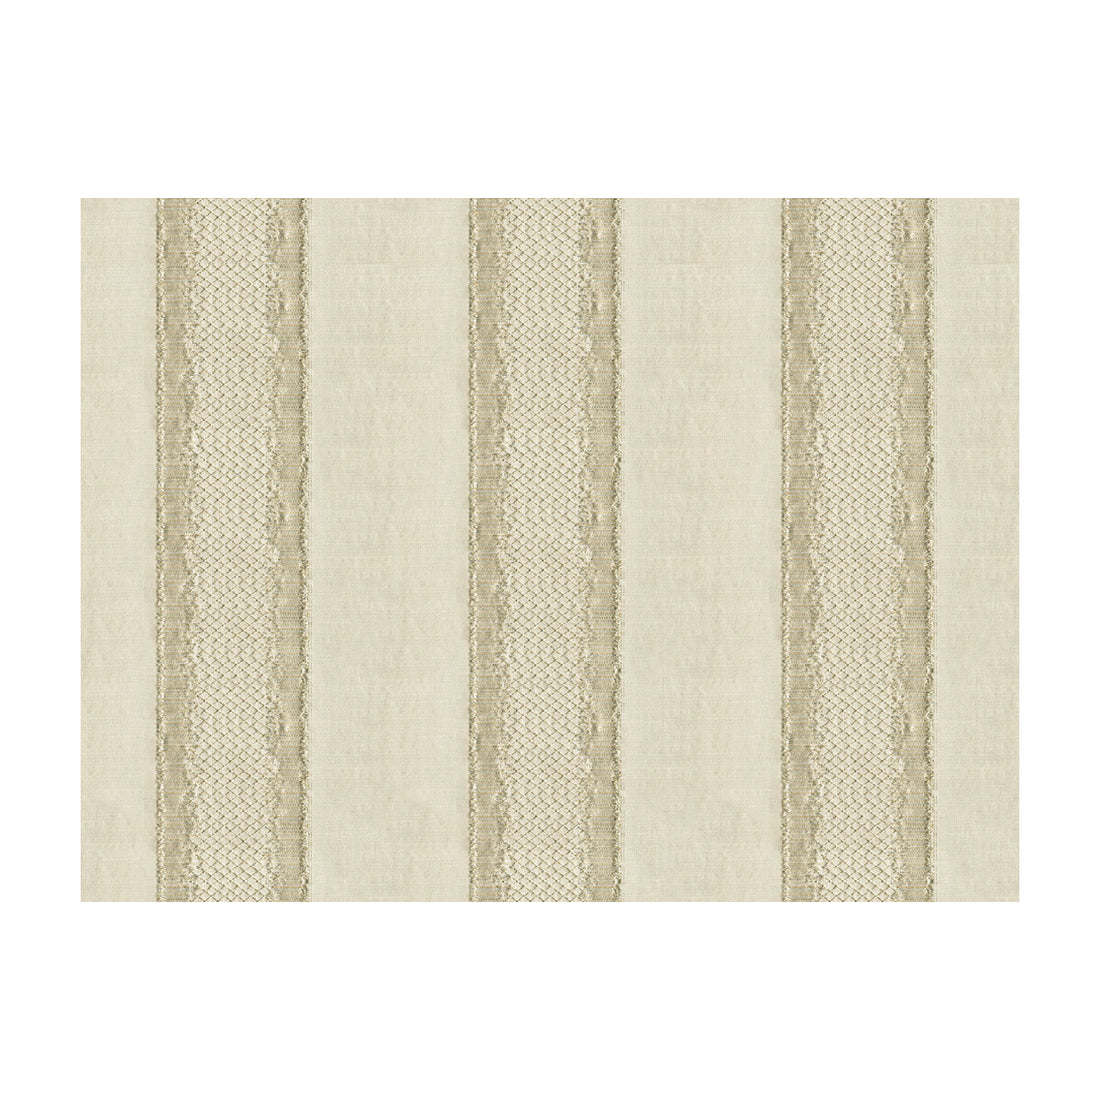 Gilded Stripe fabric in champagne color - pattern 33279.1.0 - by Kravet Couture in the Modern Luxe collection